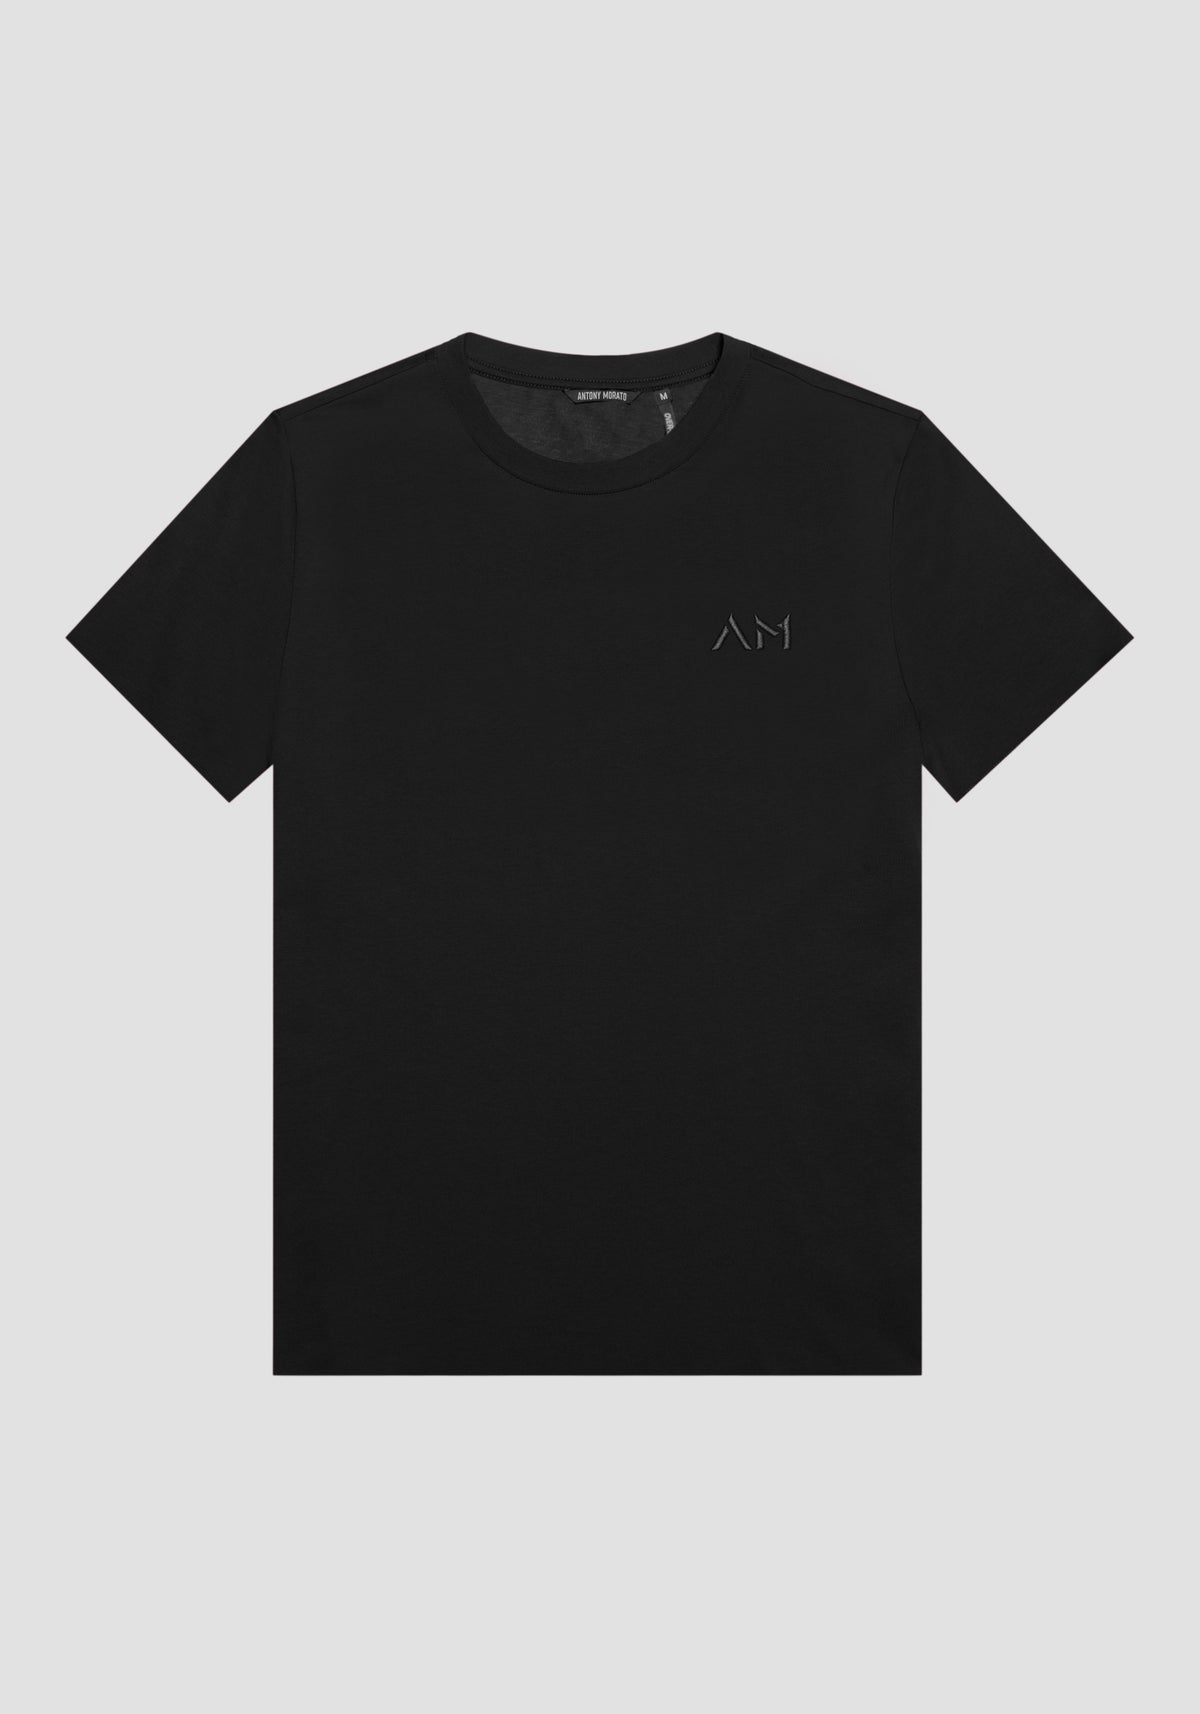 ANTONY MORATO - T-SHIRT ONE OVER FIT IN JERSEY COT - BLACK